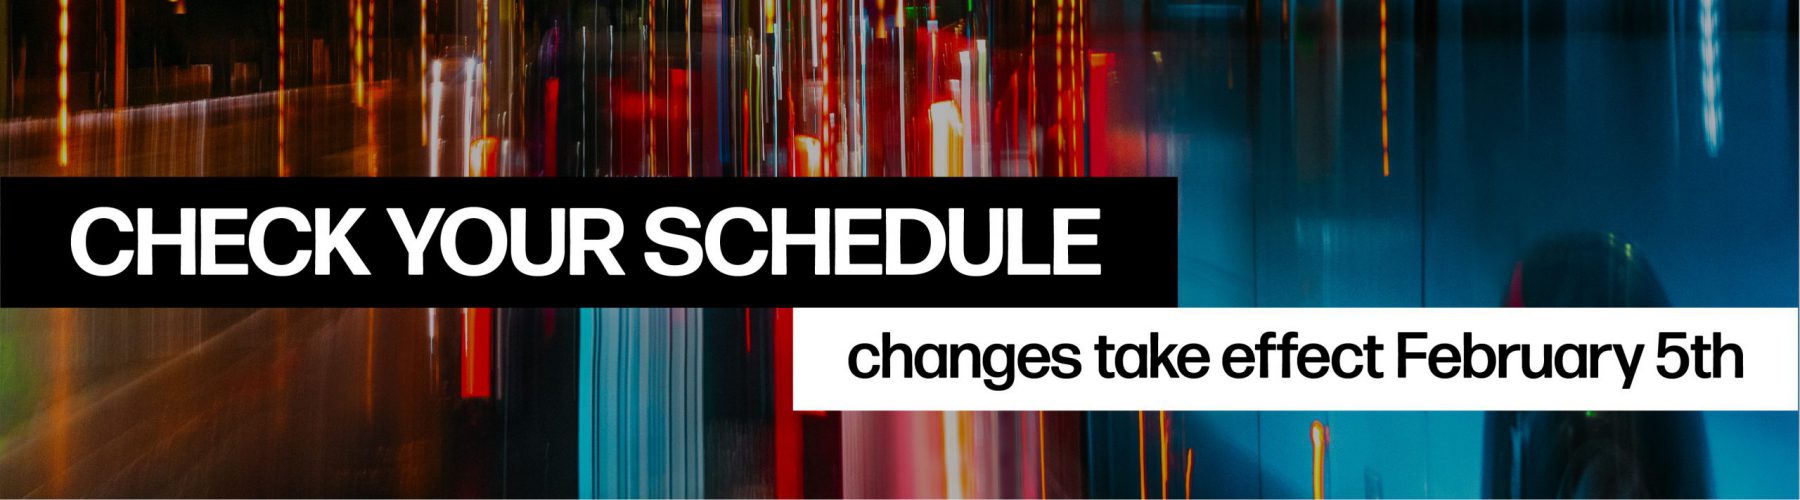 Check your Schedule as Changes take Effect on February 5th. Click the image for more information or go to the Routes and Schedules page to find your updated schedule.